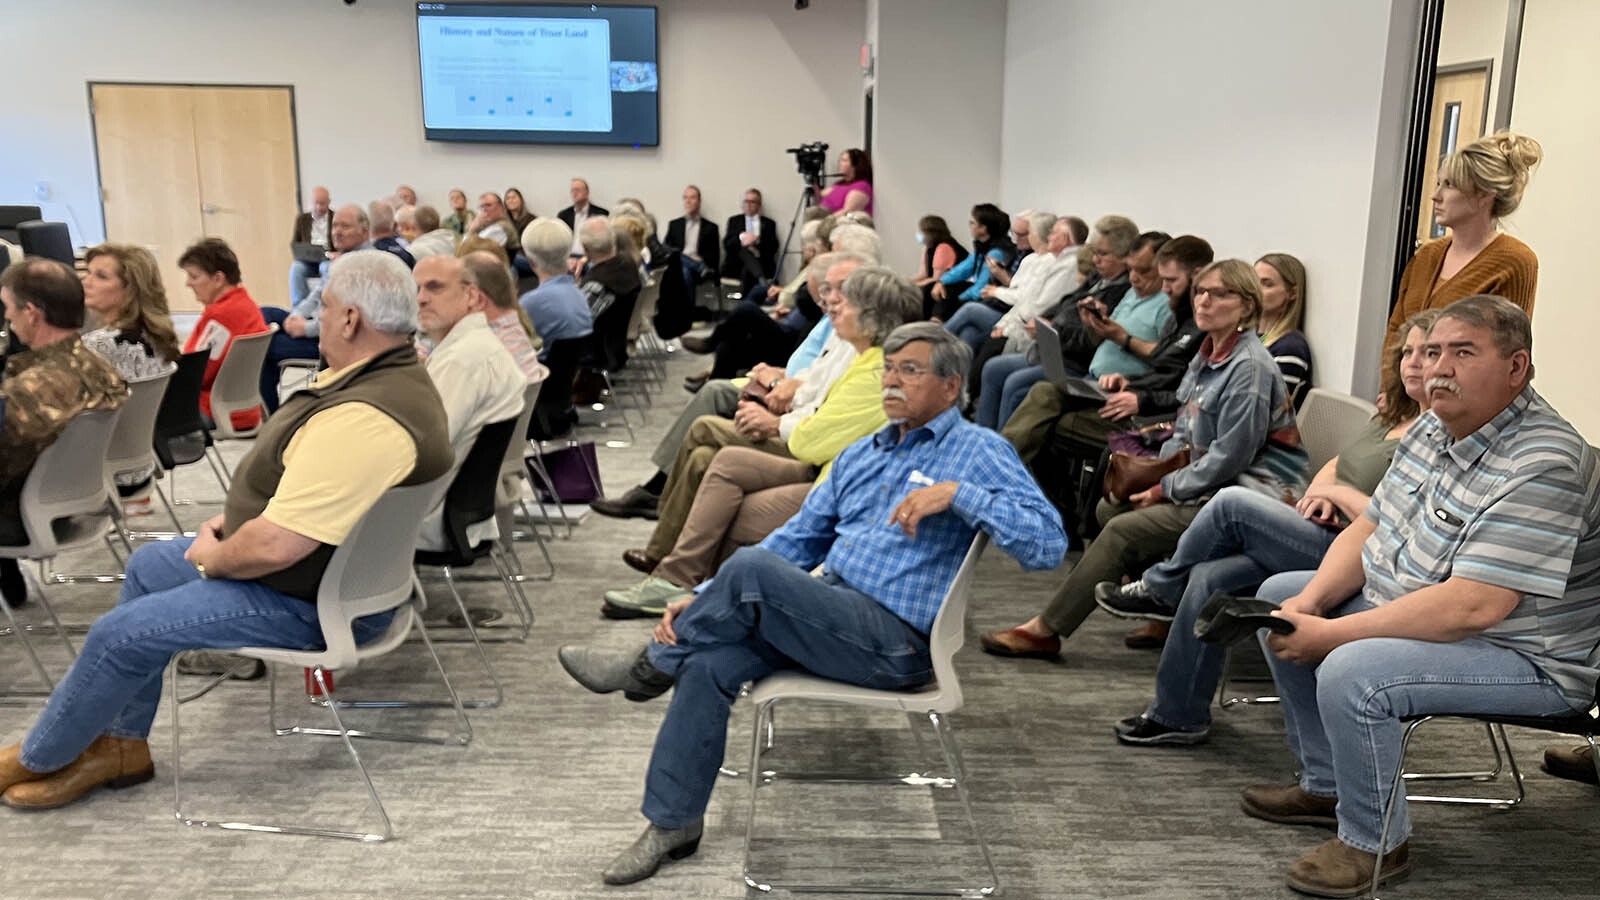 It was standing room only in Casper for Thursday's State Land Board meeting with locals wanting to talk about a proposed gravel pit operation.